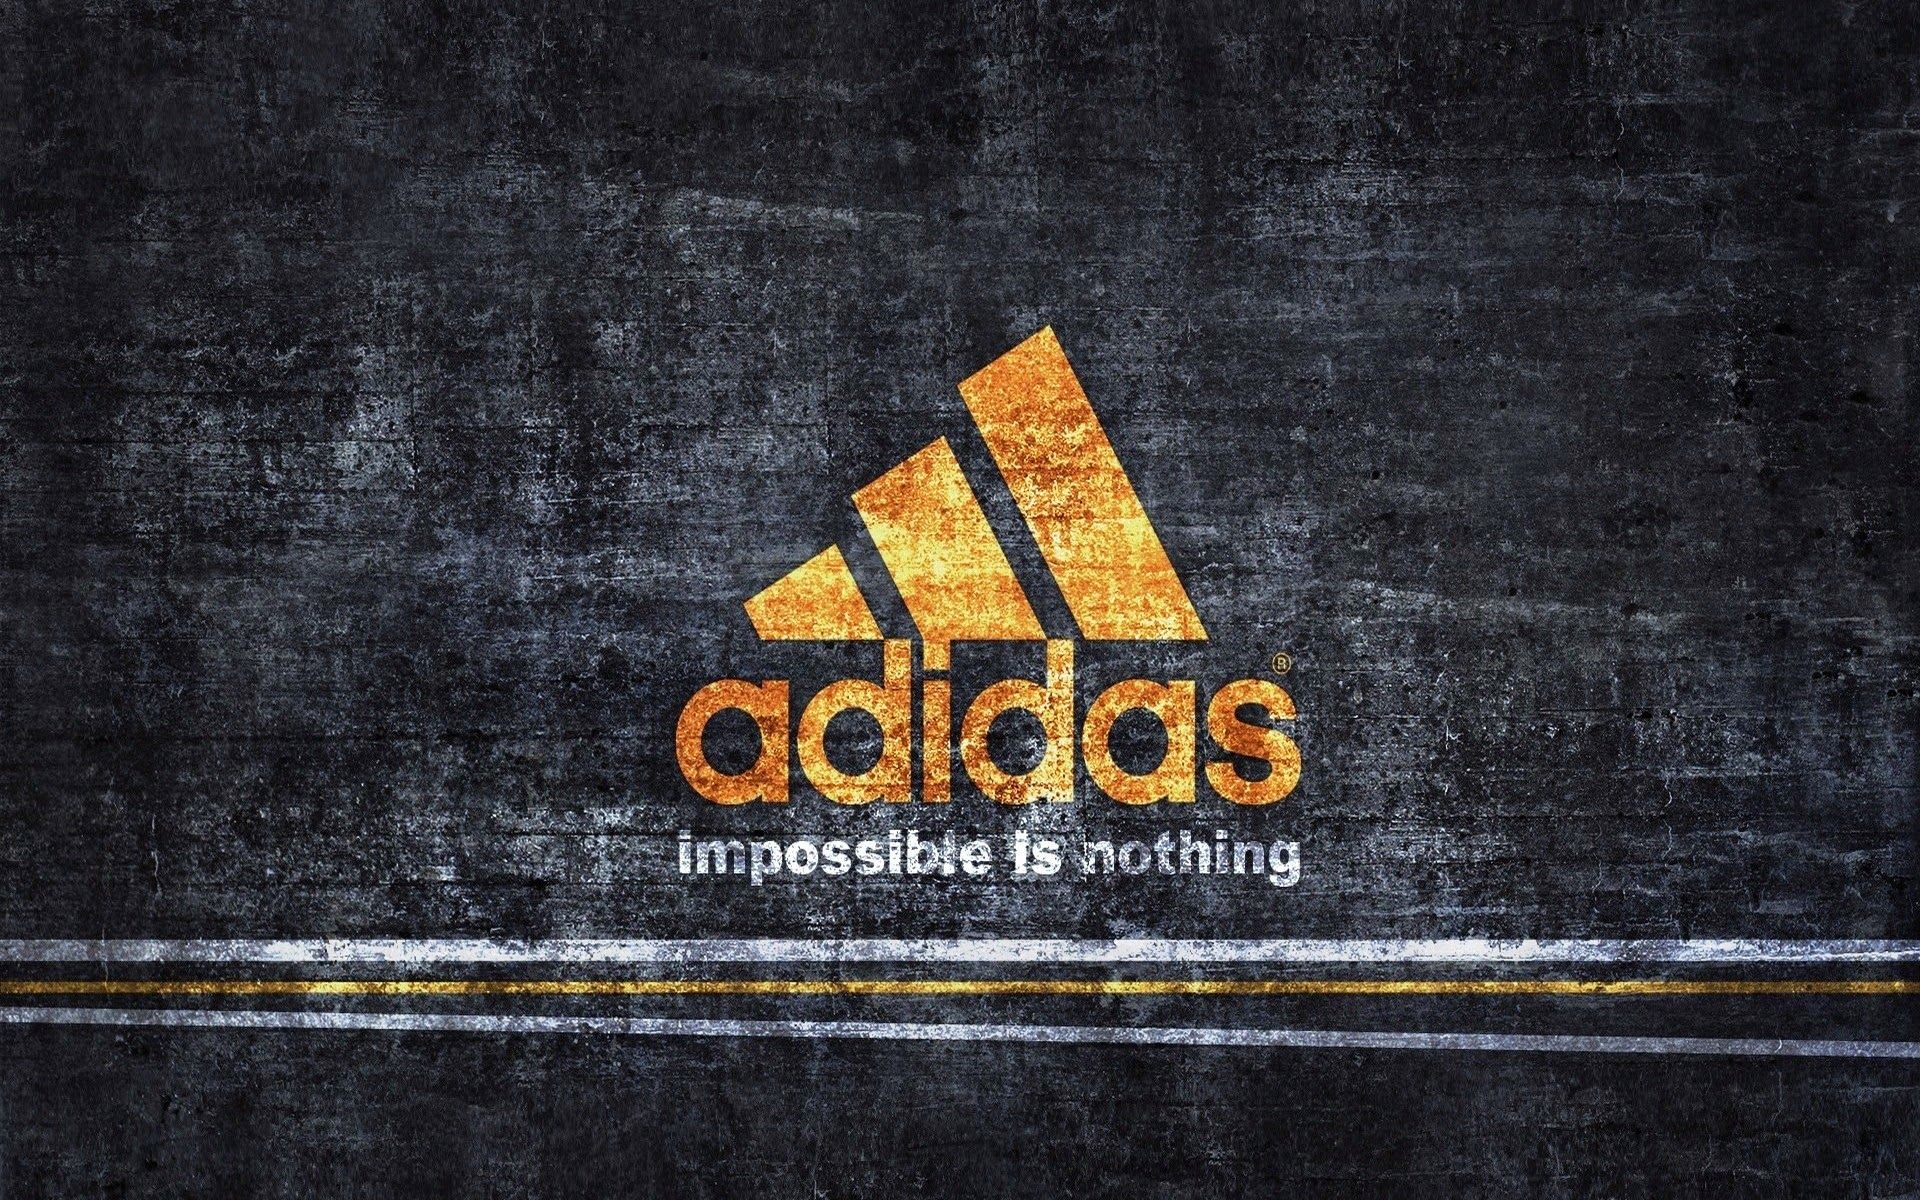 Adidas Impossible is Nothing HD Wallpaper HD Wallpaper, High Quality Wallpaper For Your Laptop And Desktop Download For Free